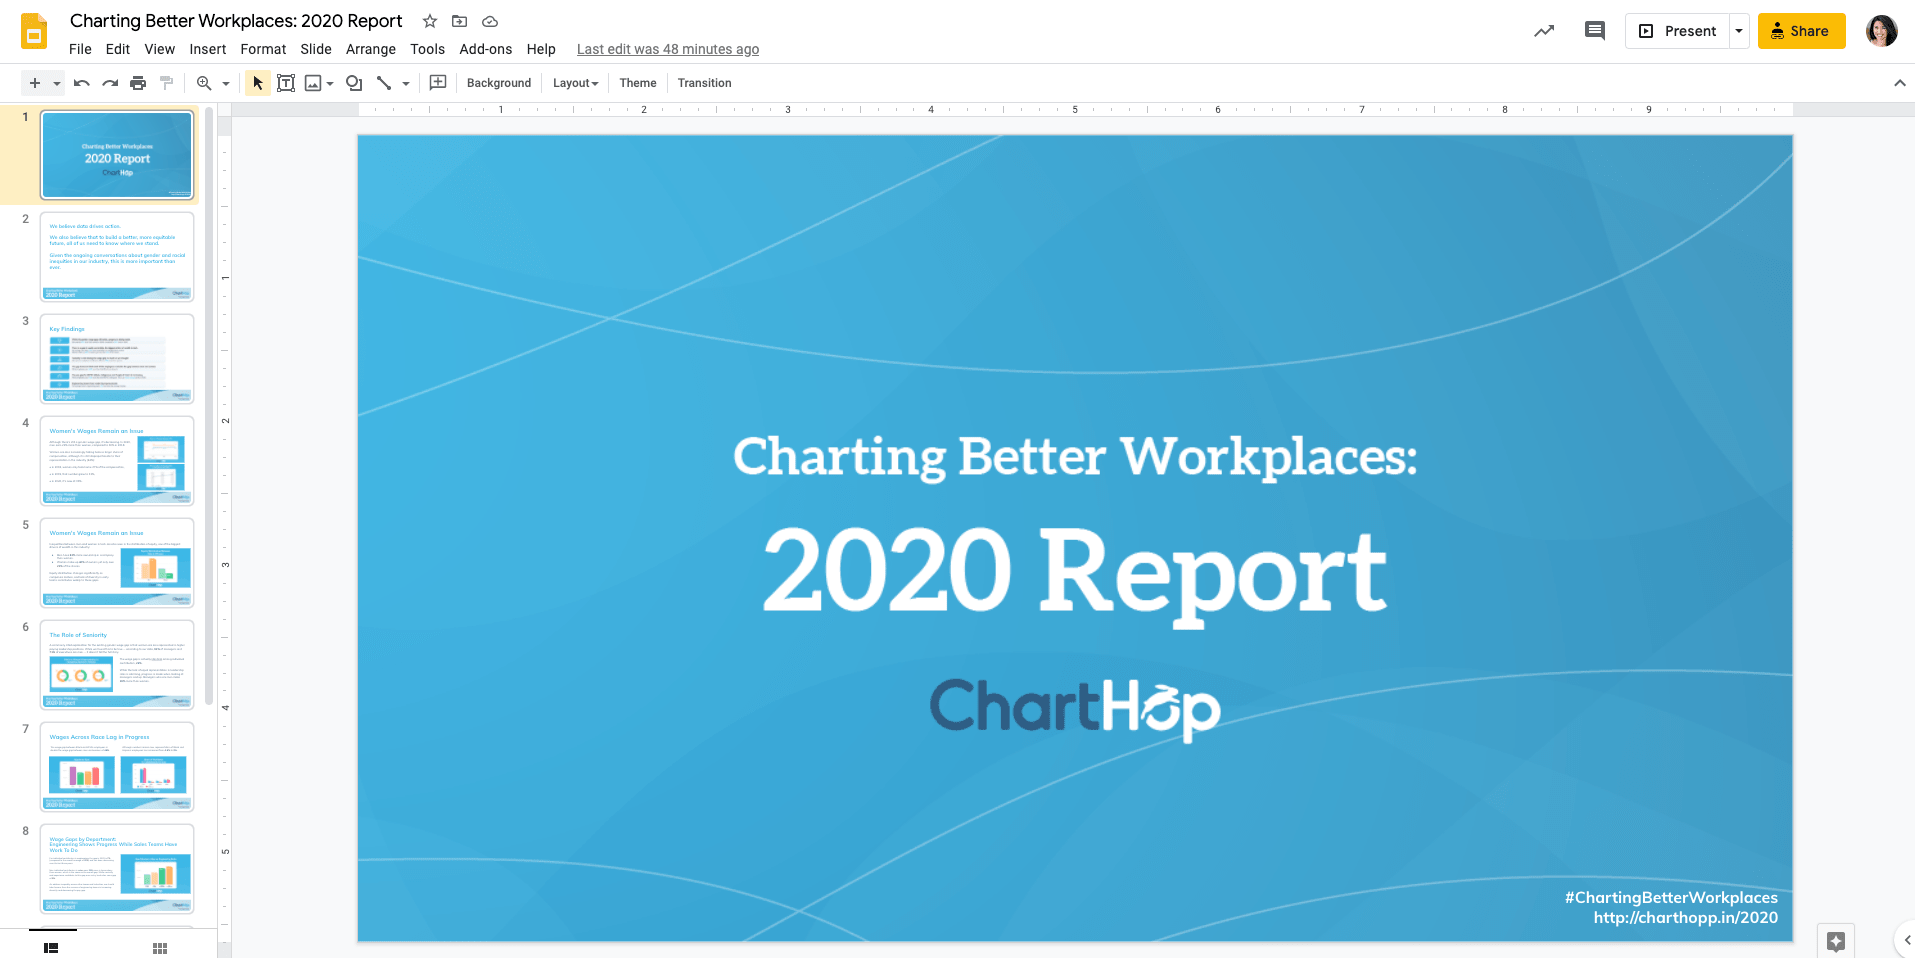 Charting Better Workplaces presentation